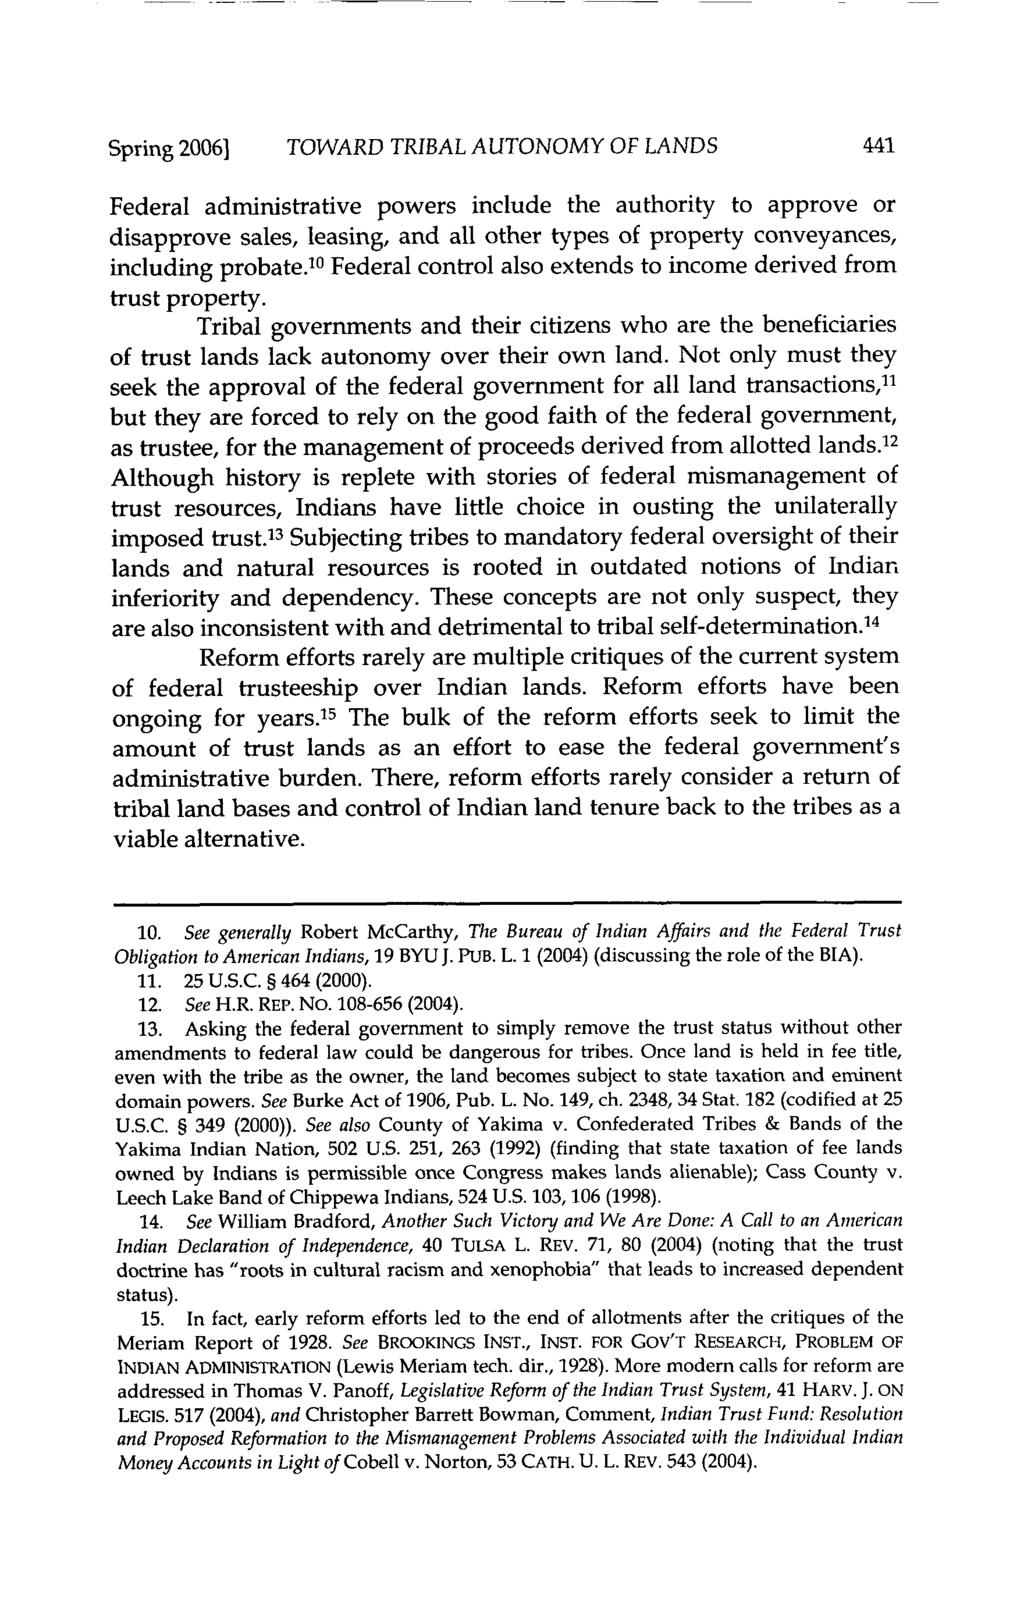 Spring 2006] TOWARD TRIBAL AUTONOMY OF LANDS 441 Federal administrative powers include the authority to approve or disapprove sales, leasing, and all other types of property conveyances, including